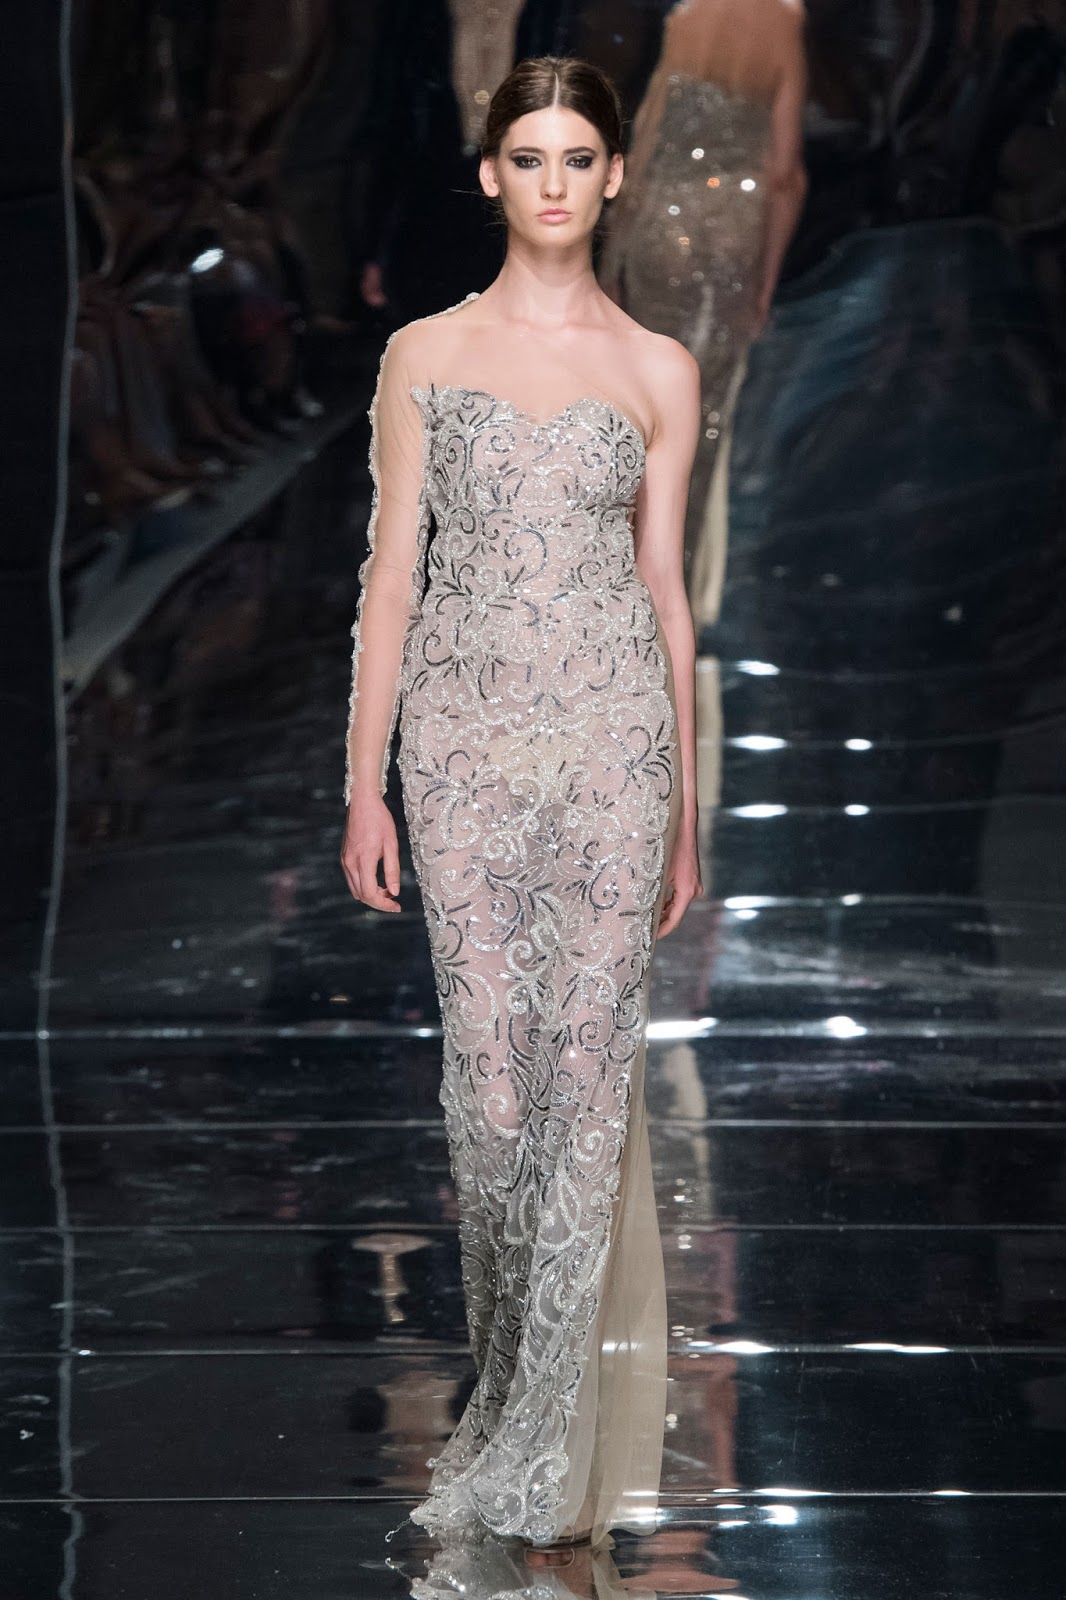 Sparkles and Glamour on the Runway